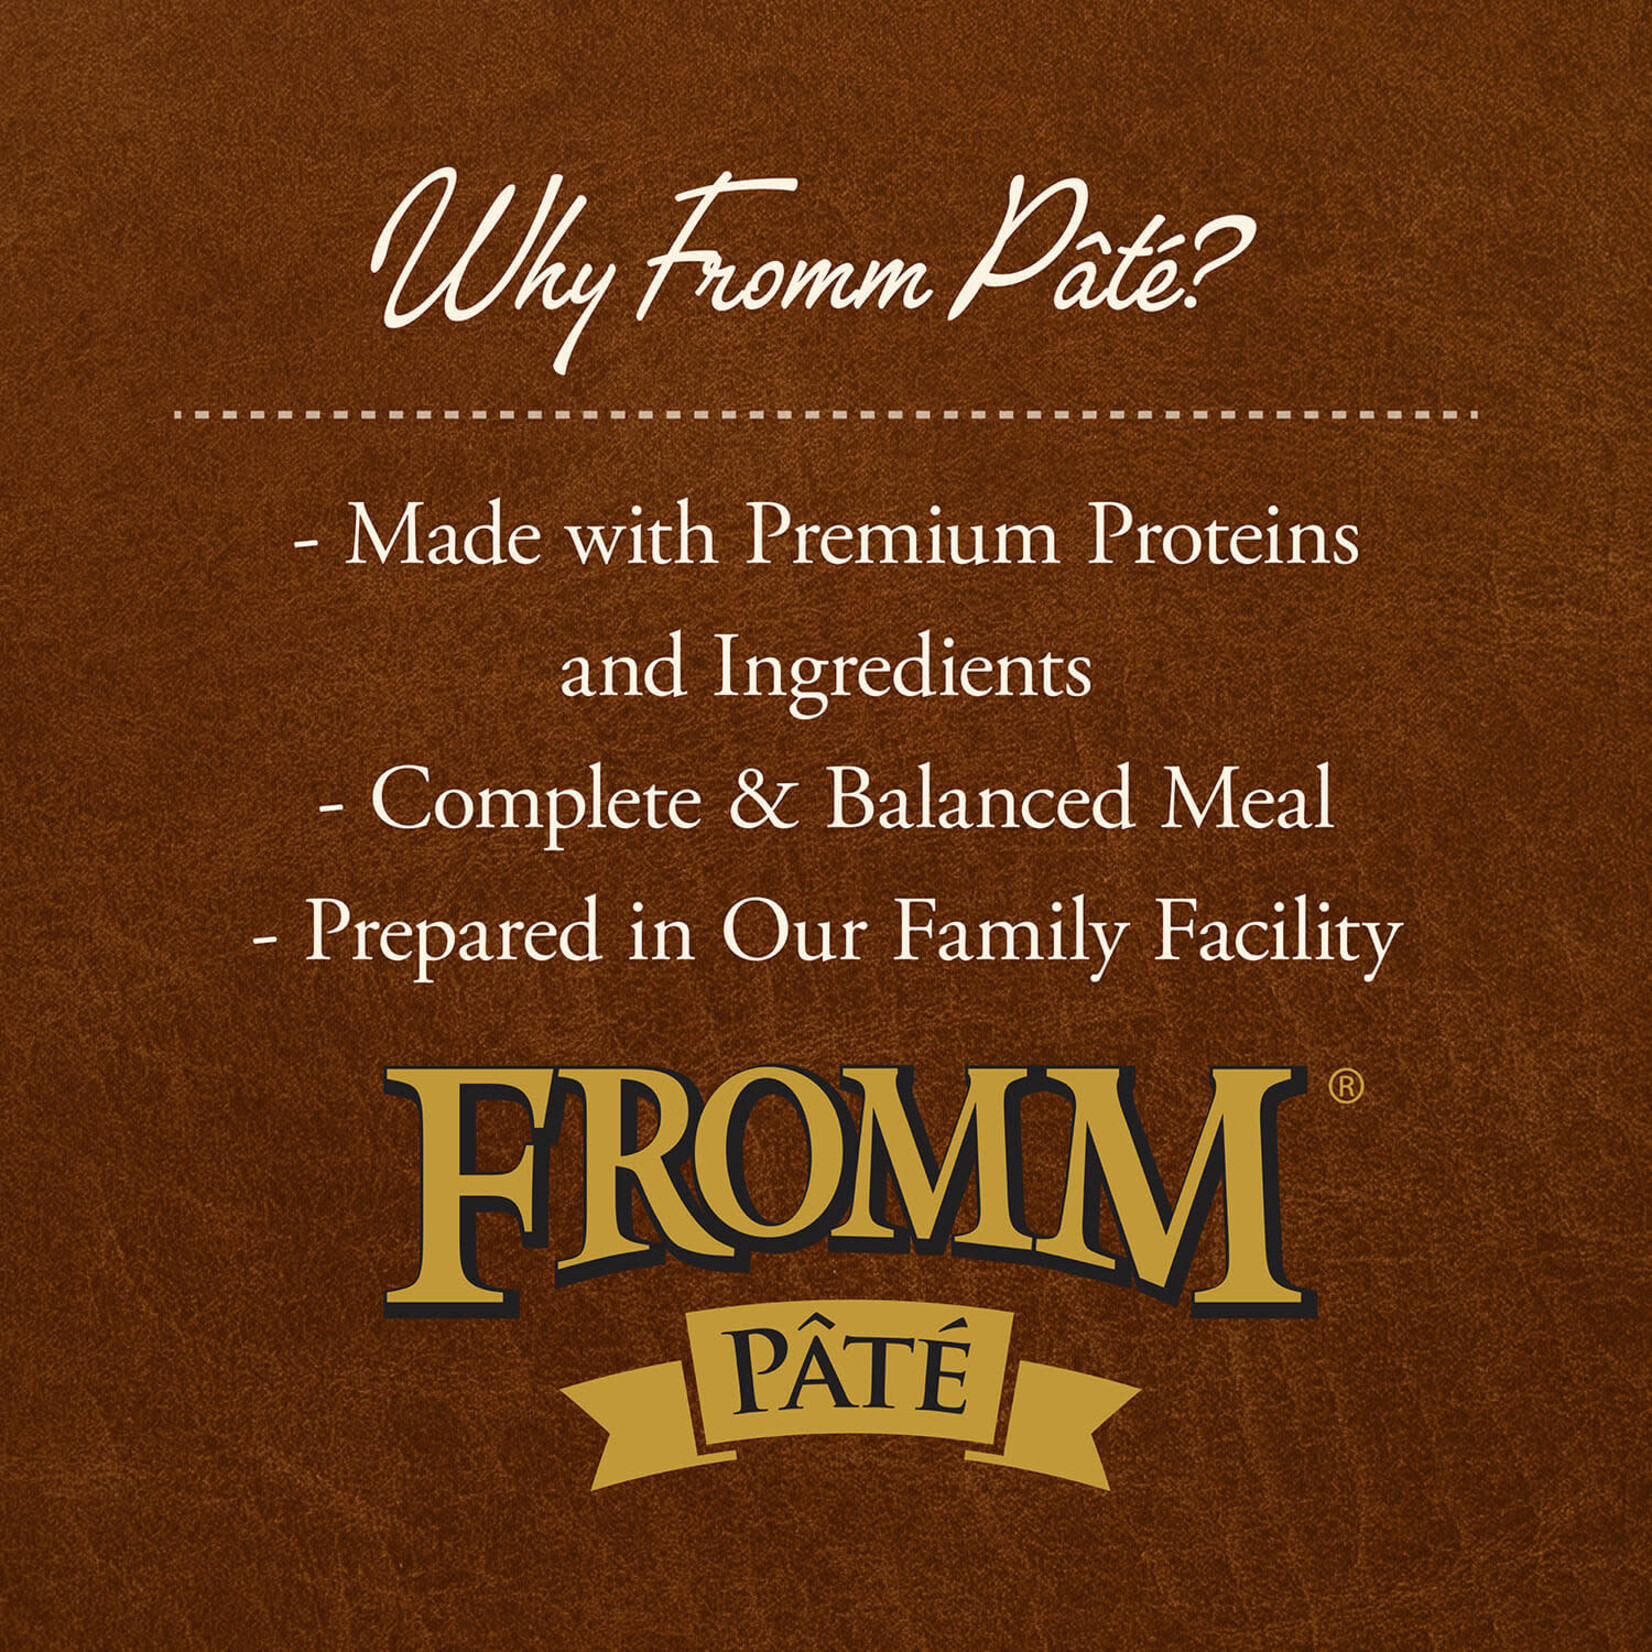 Fromm Chicken & Duck Pate Dog Food